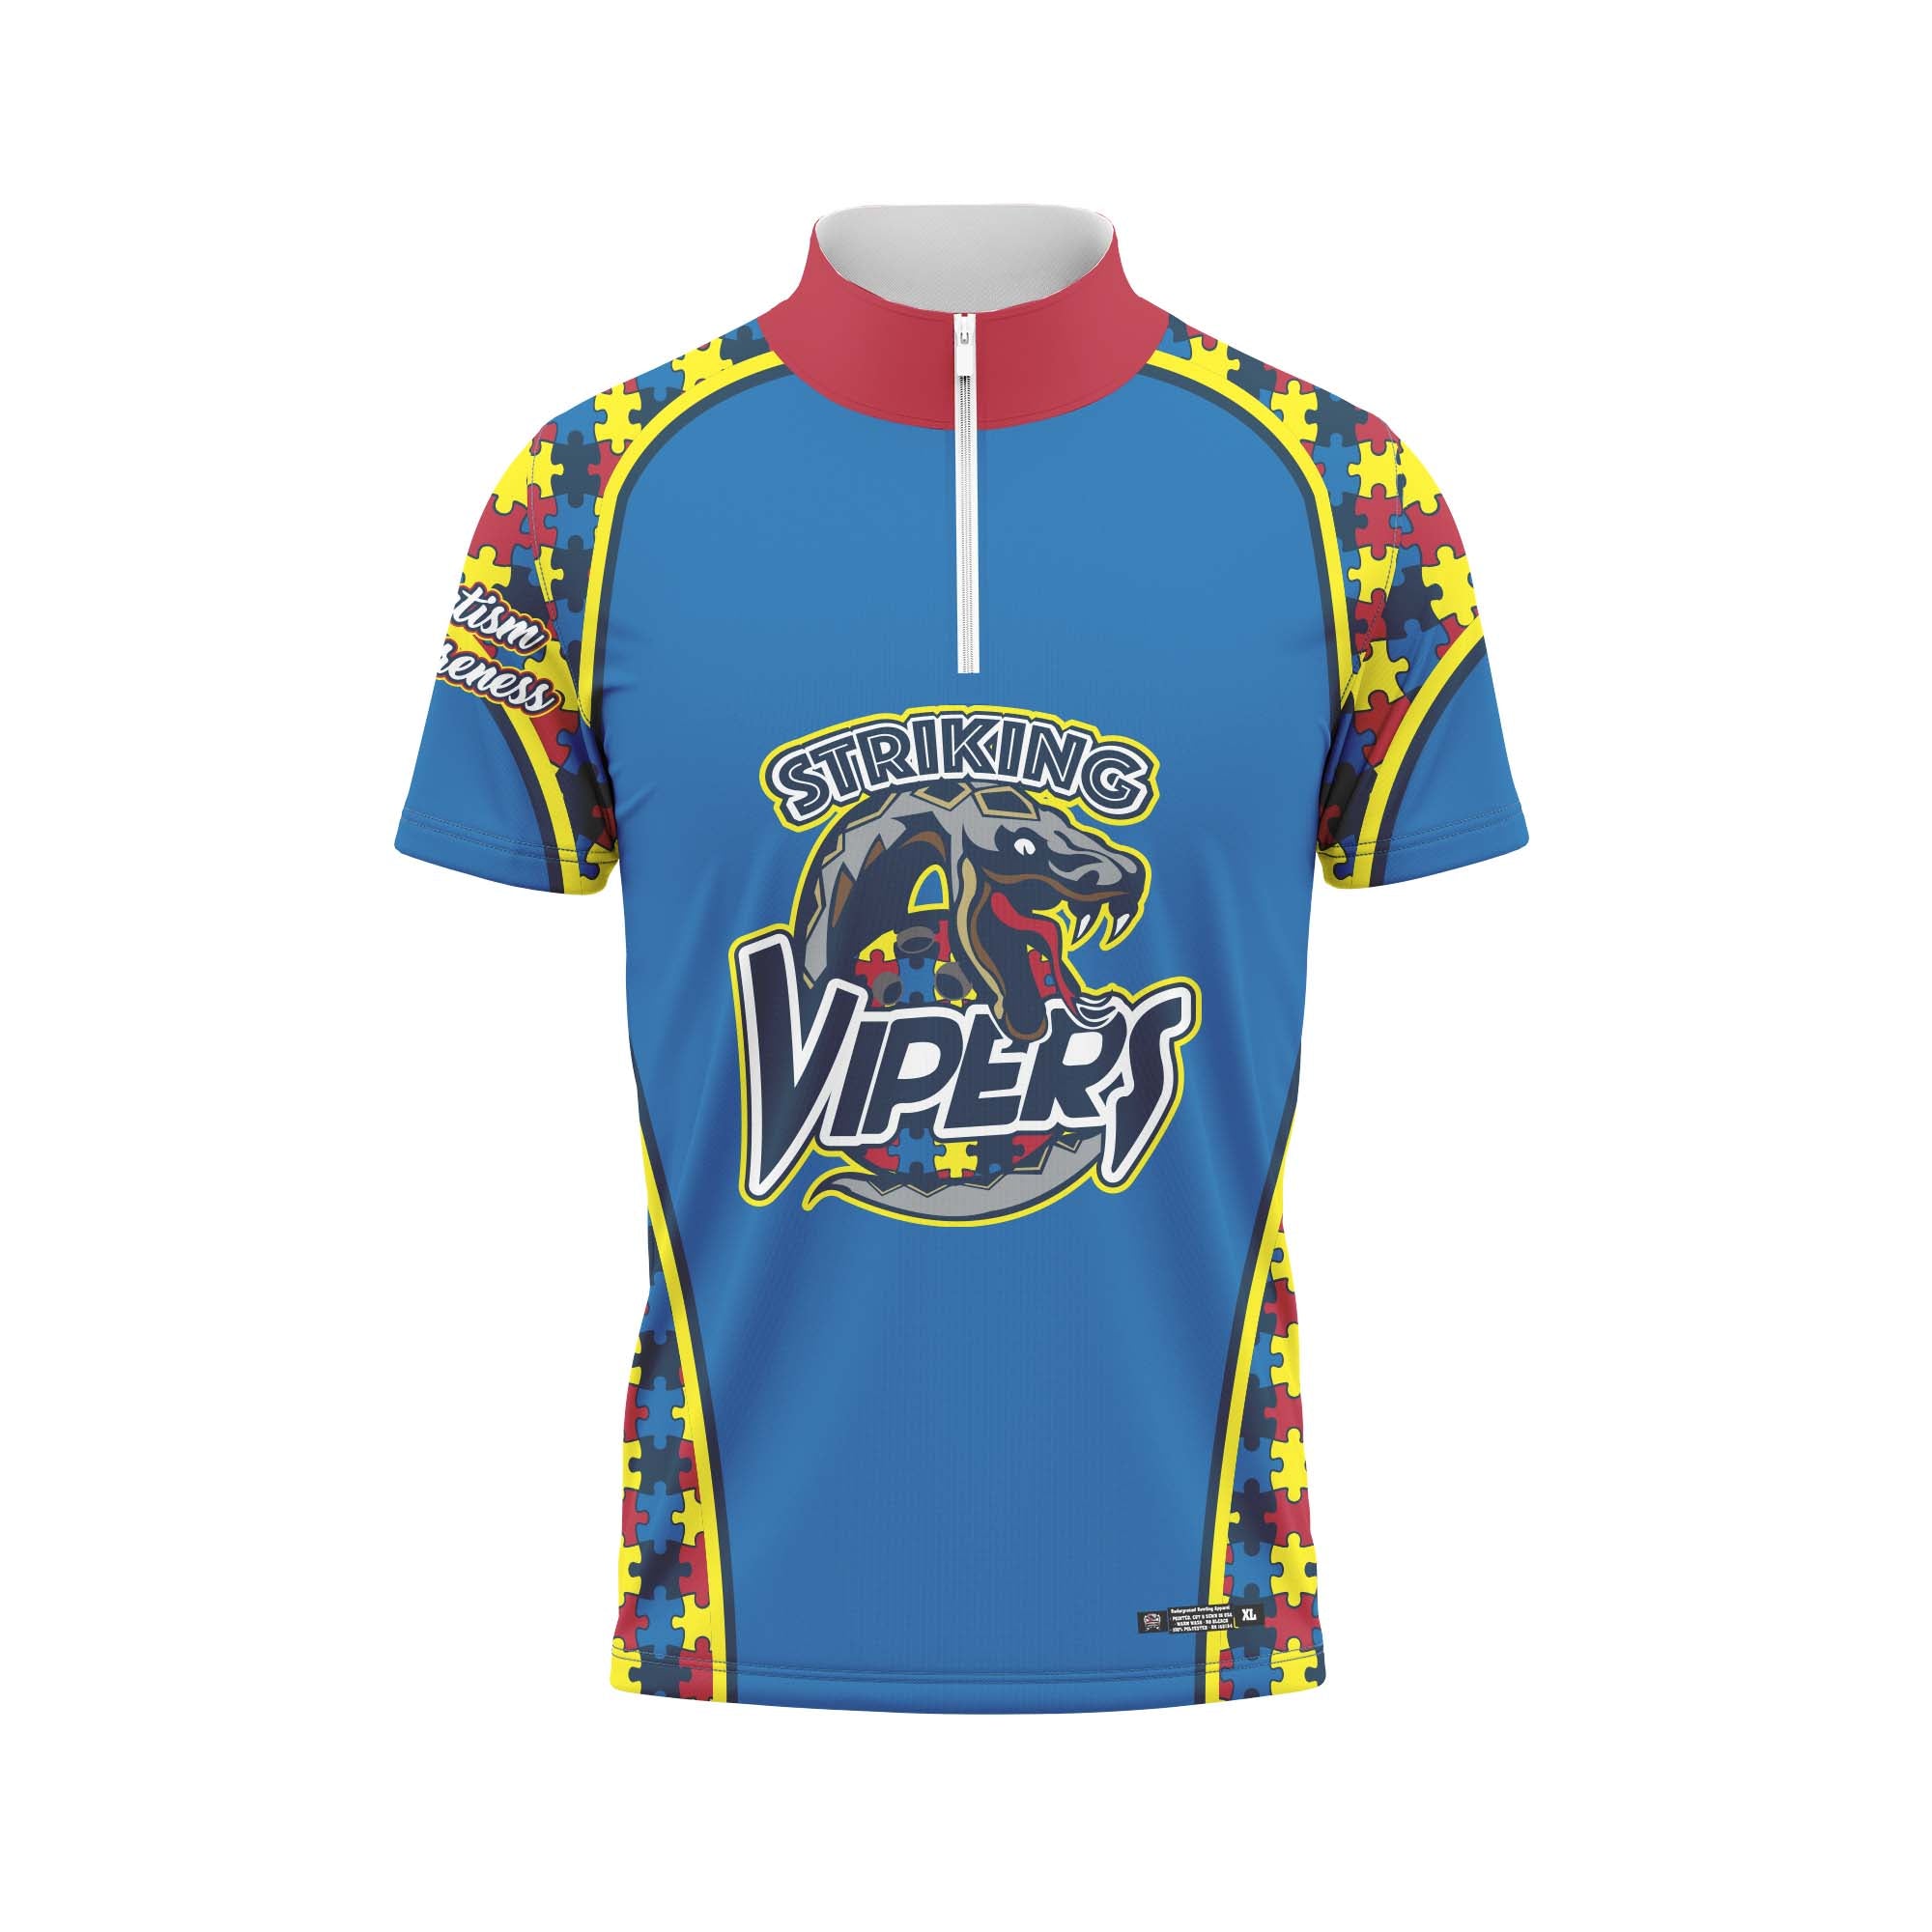 Striking Vipers Autism Jersey